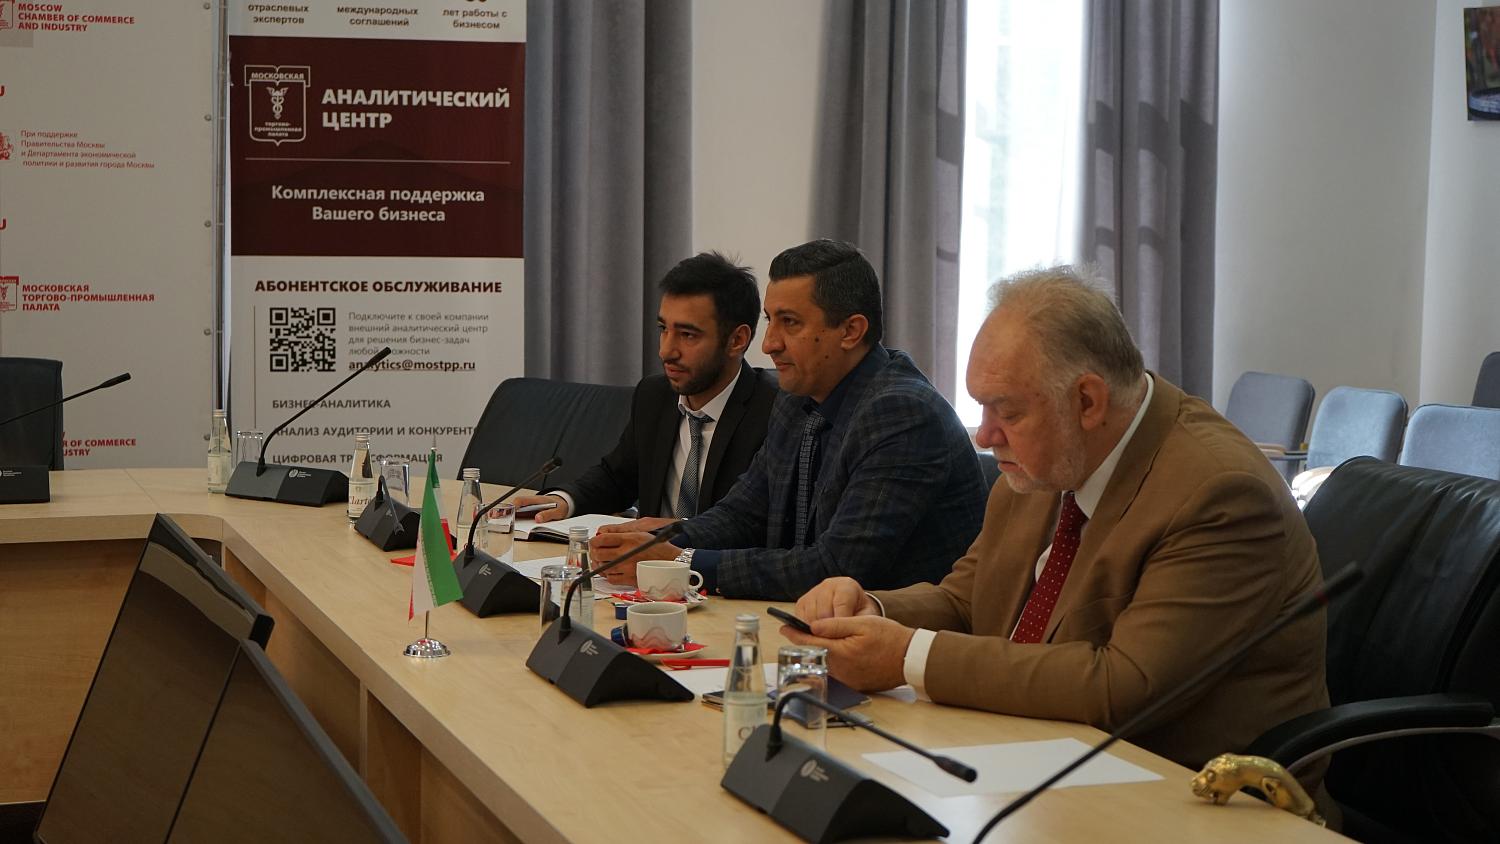 A delegation from the Islamic Republic of Iran visited the Moscow Chamber of Commerce and Industry